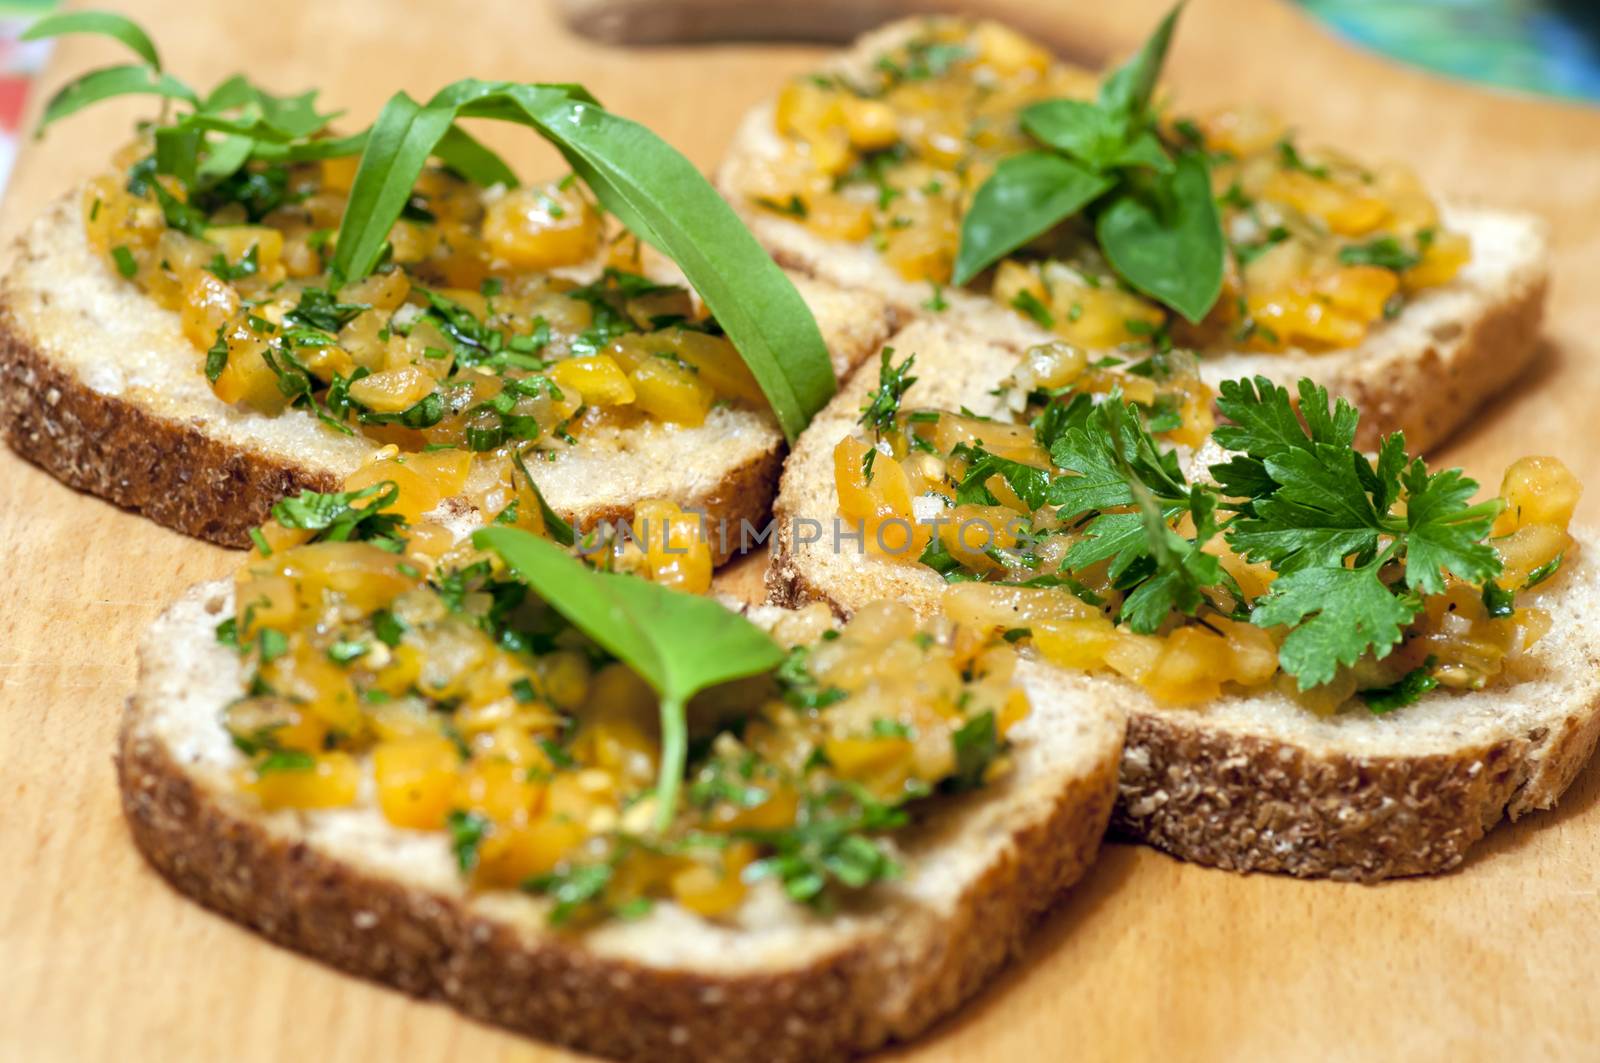 Italian bruschetta topped with yellow tomatoes, parsley, basil and rucola